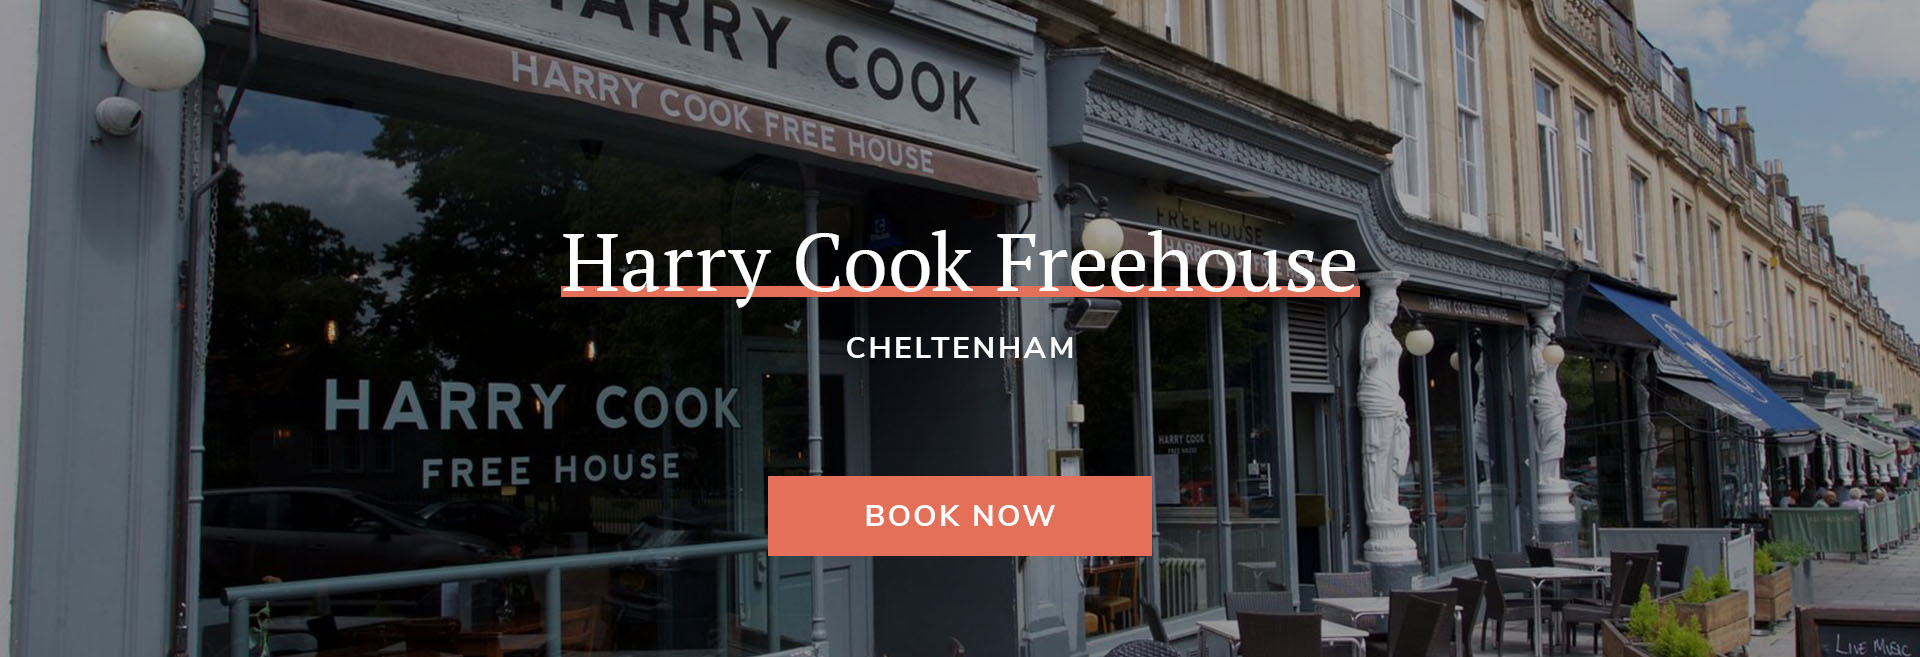 Harry Cook Free House Banner 2